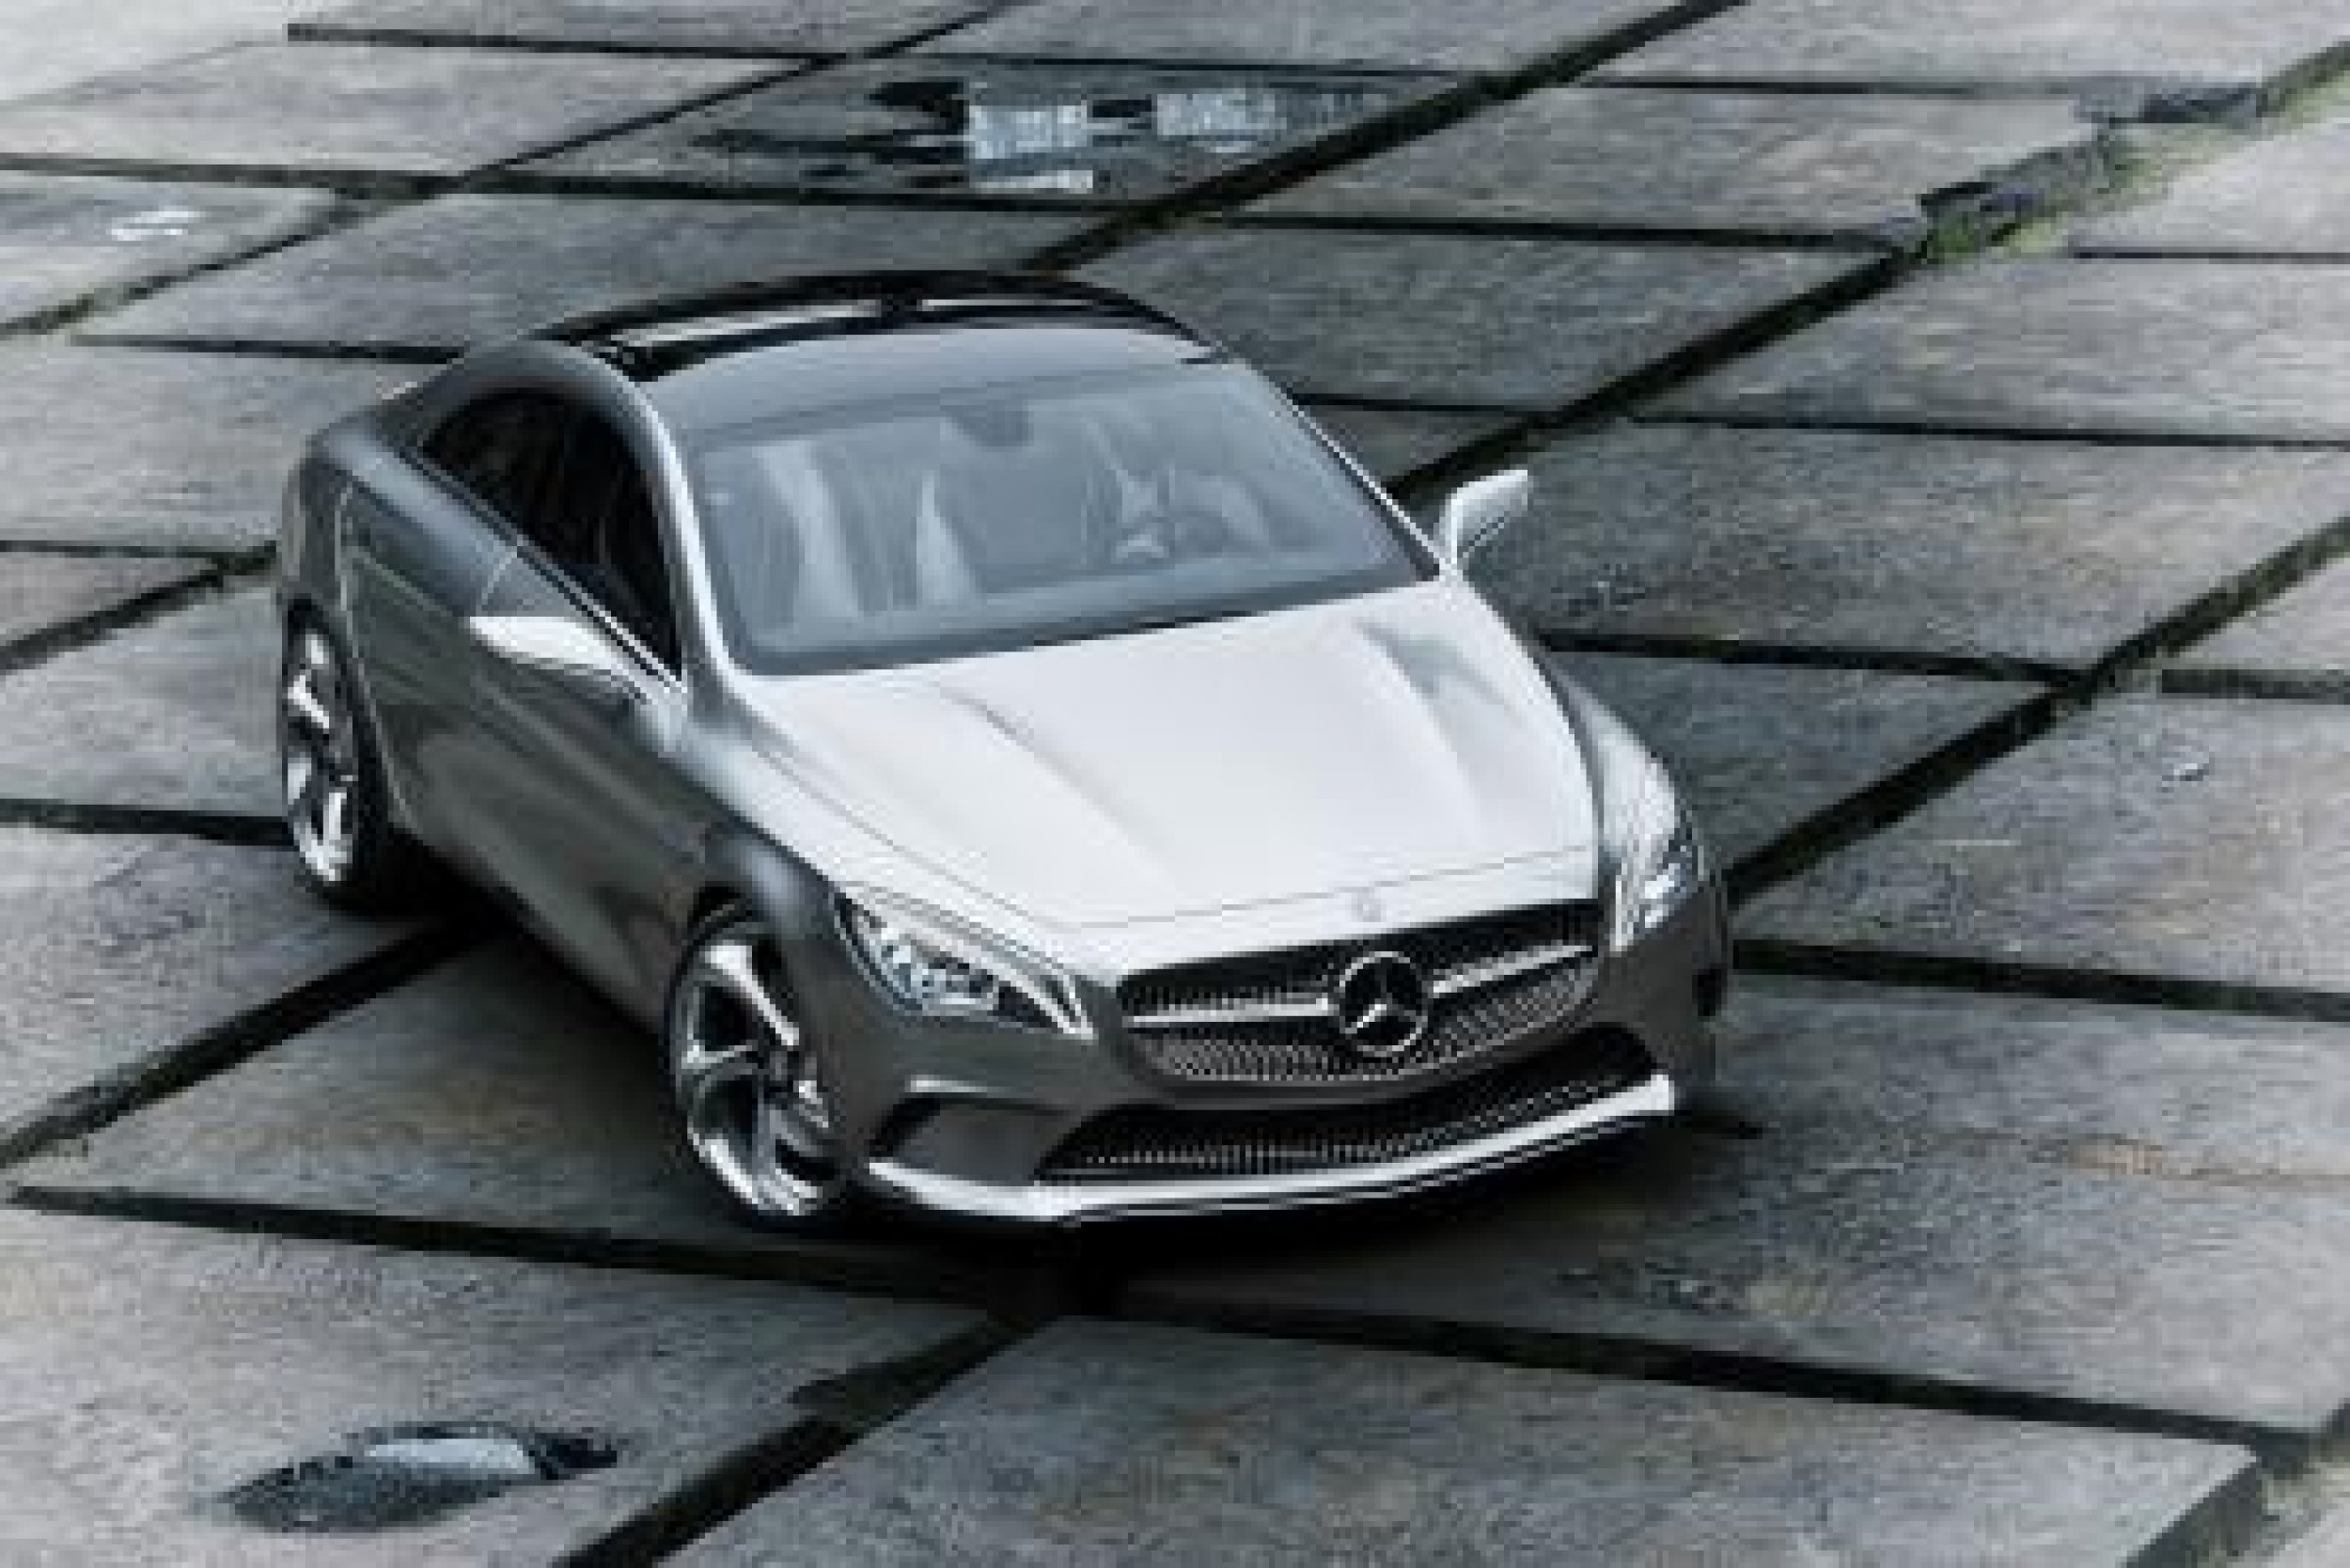 The Mercedes Concept Style Coupe parked on some enormous tiles.